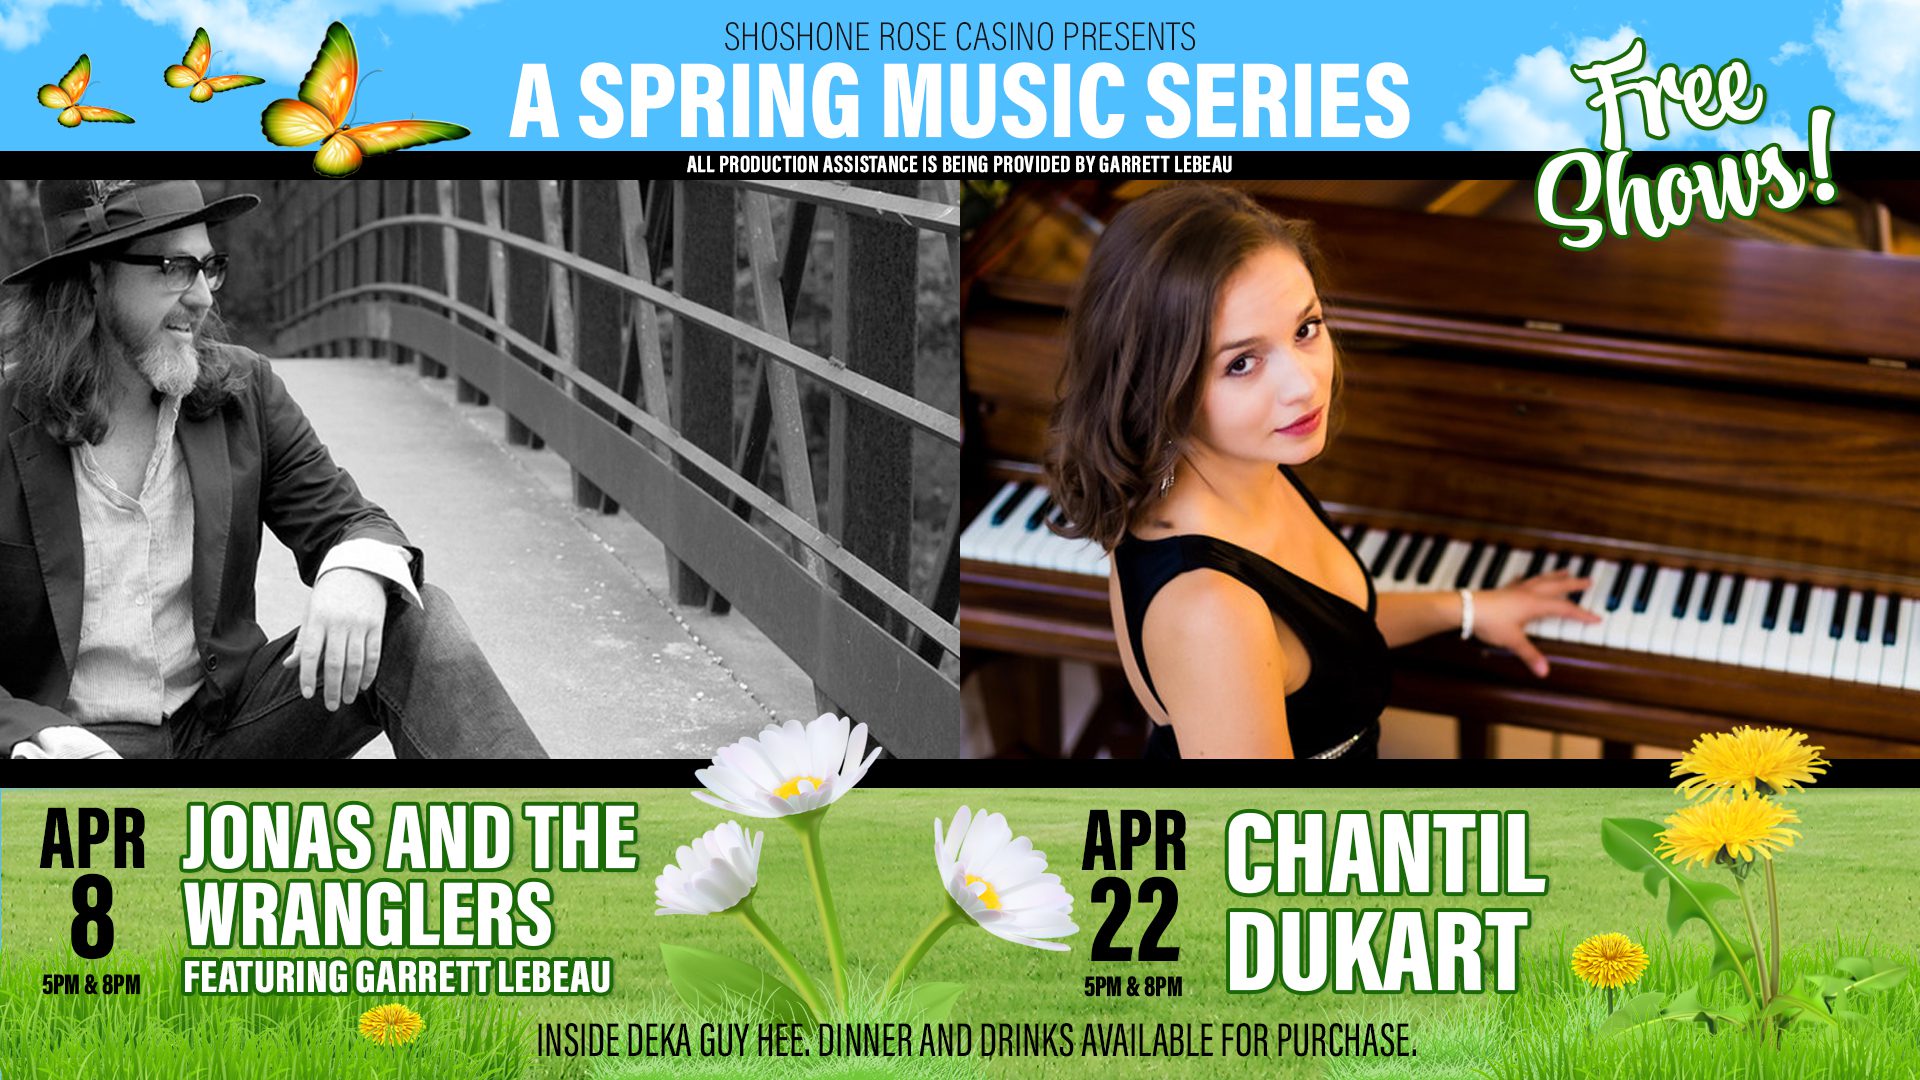 A poster for the spring music series featuring chantelle dukart and the piano players.